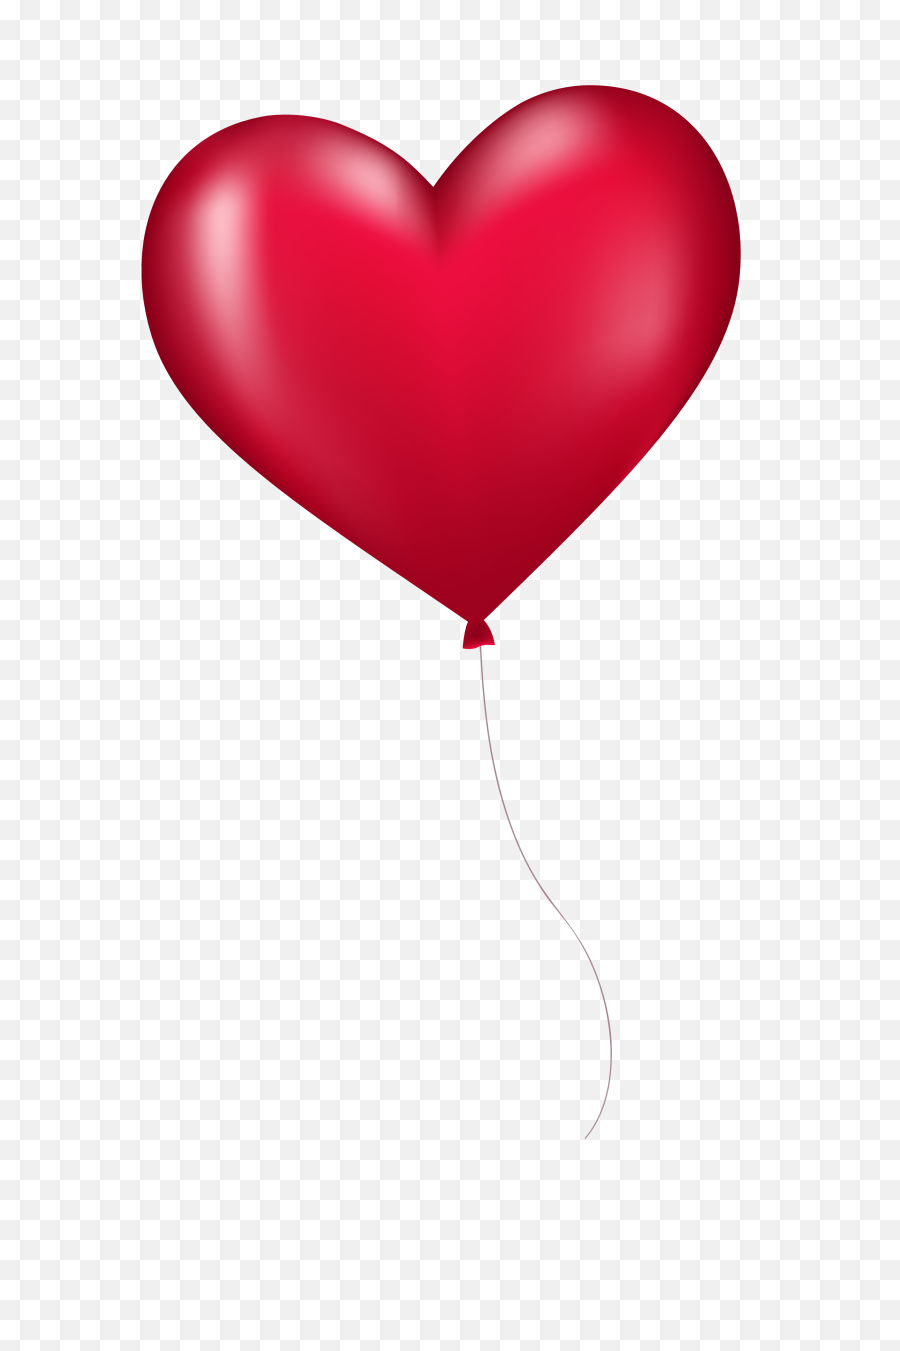 Download Hd Heart Balloon Png Image Transparent Best - Heart Shape Balloon Png,Real Balloons Png